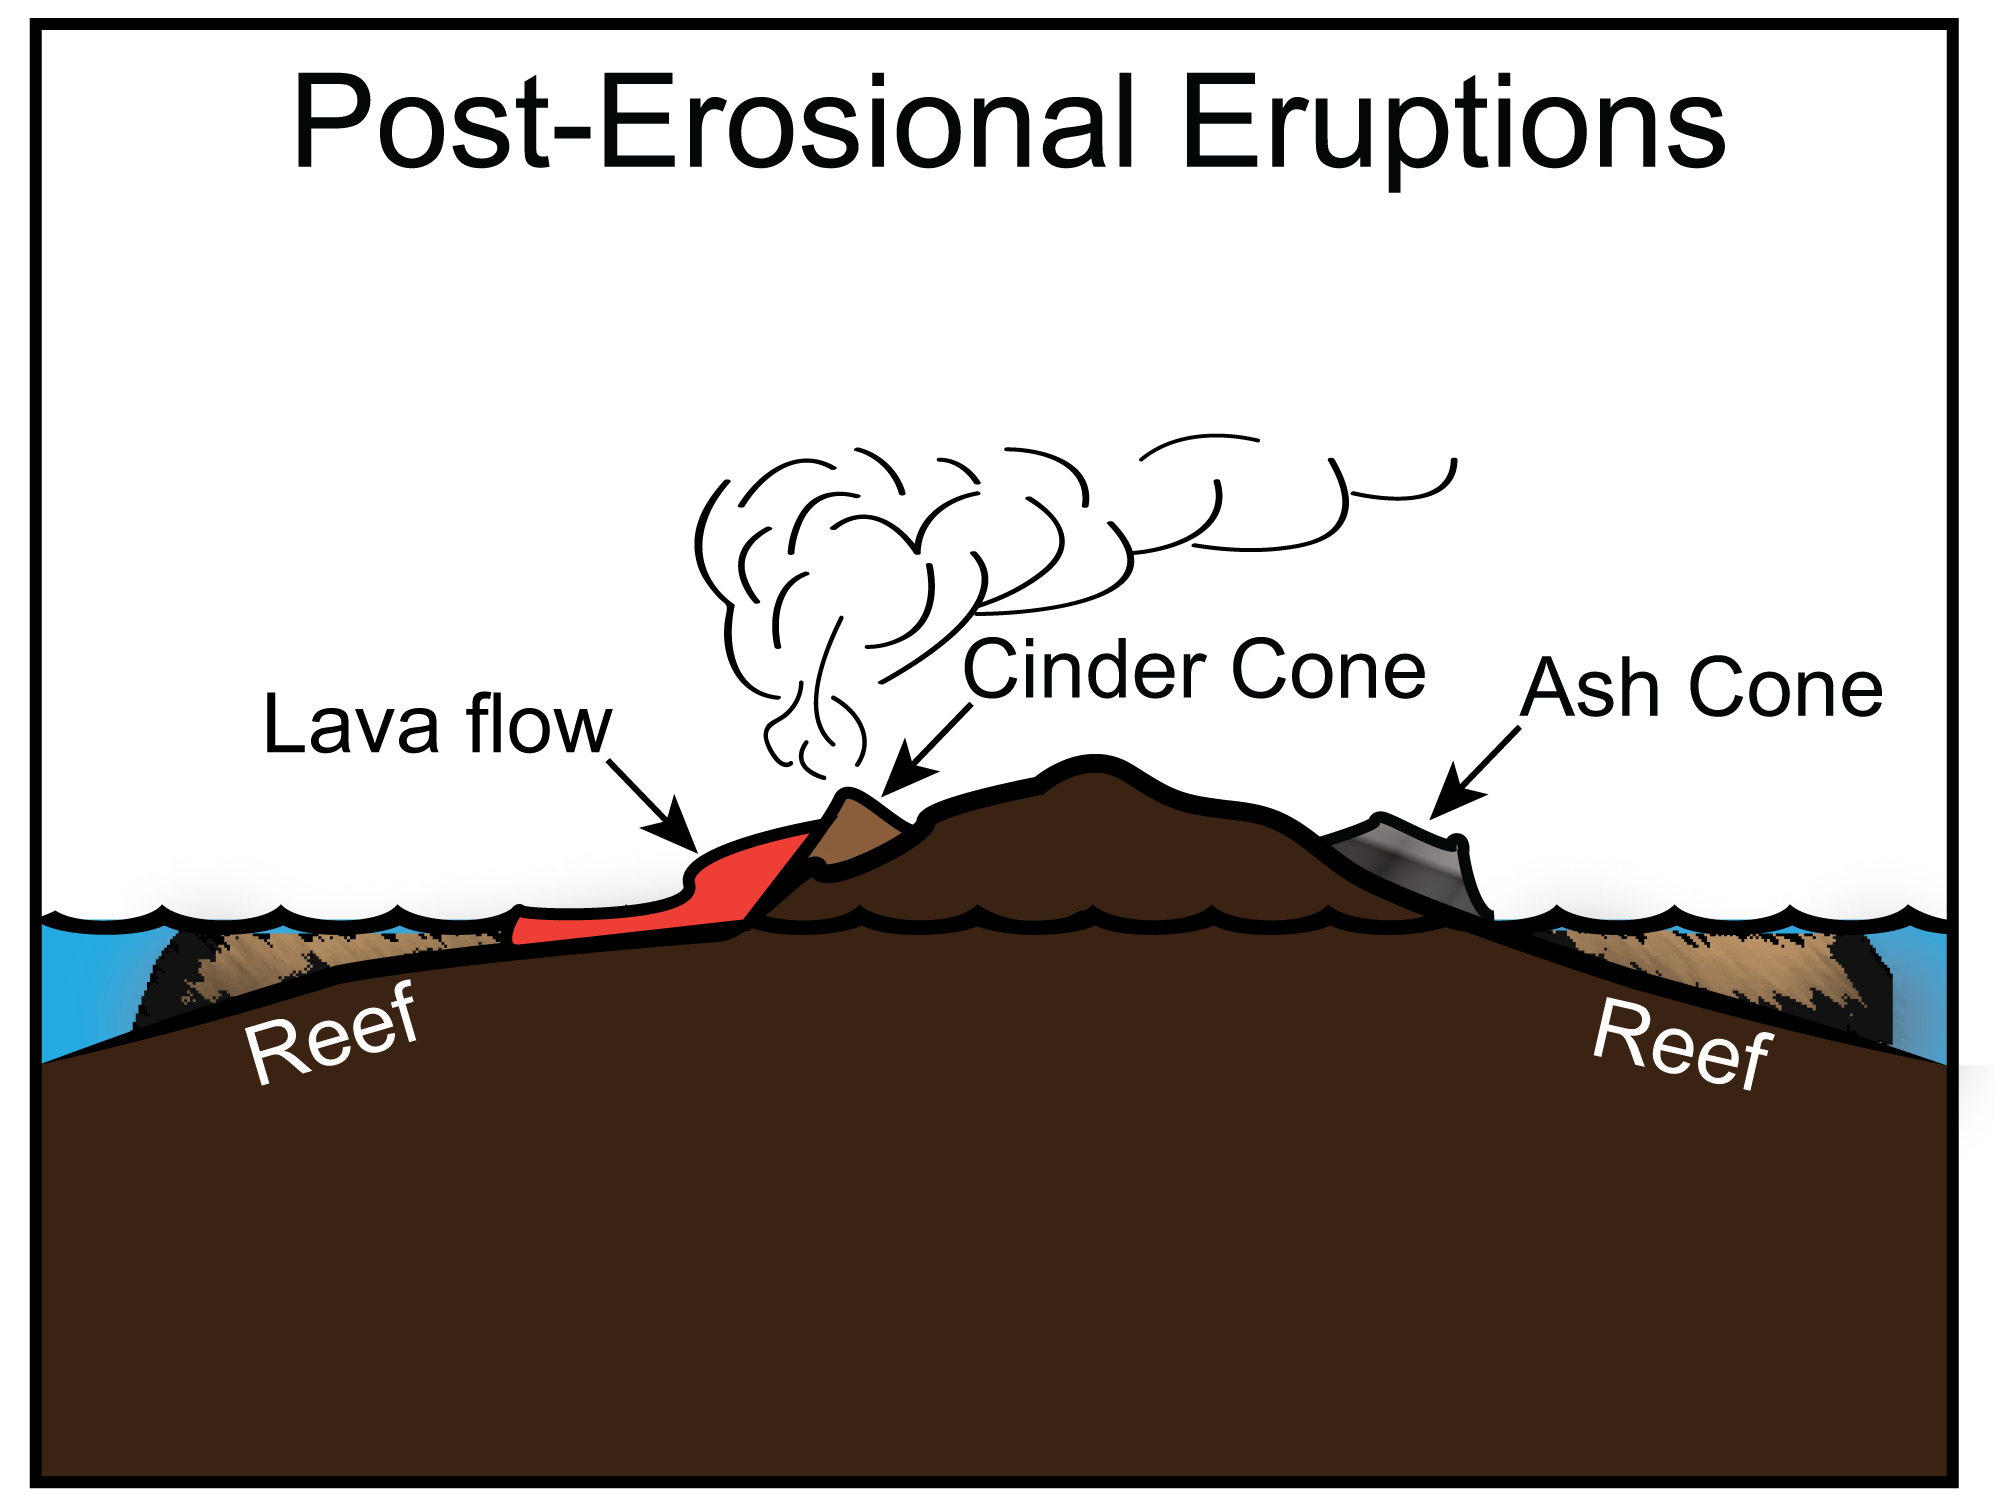 Diagram of the post-erosional eruptions stage of the volcanic island life cycle. In this image, the heavily eroded volcano is rejuvenated, and cinder and ash cones form on its flanks, near the coastline. Wide coral reefs still encircle the island.